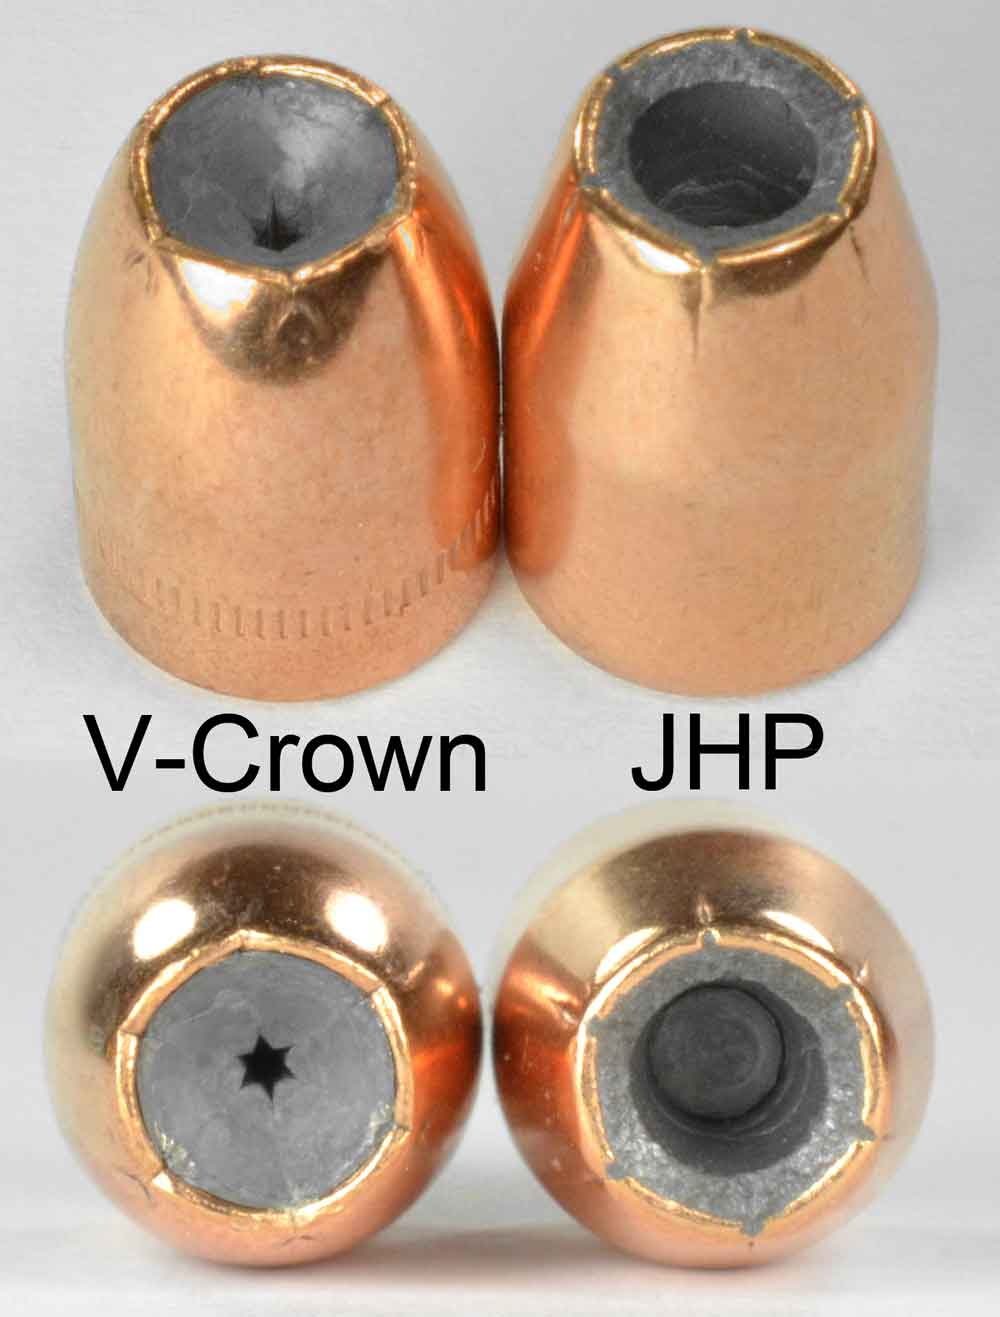 Top view of Sierra's Sierra V-Crown and traditional jacketed hollow points.